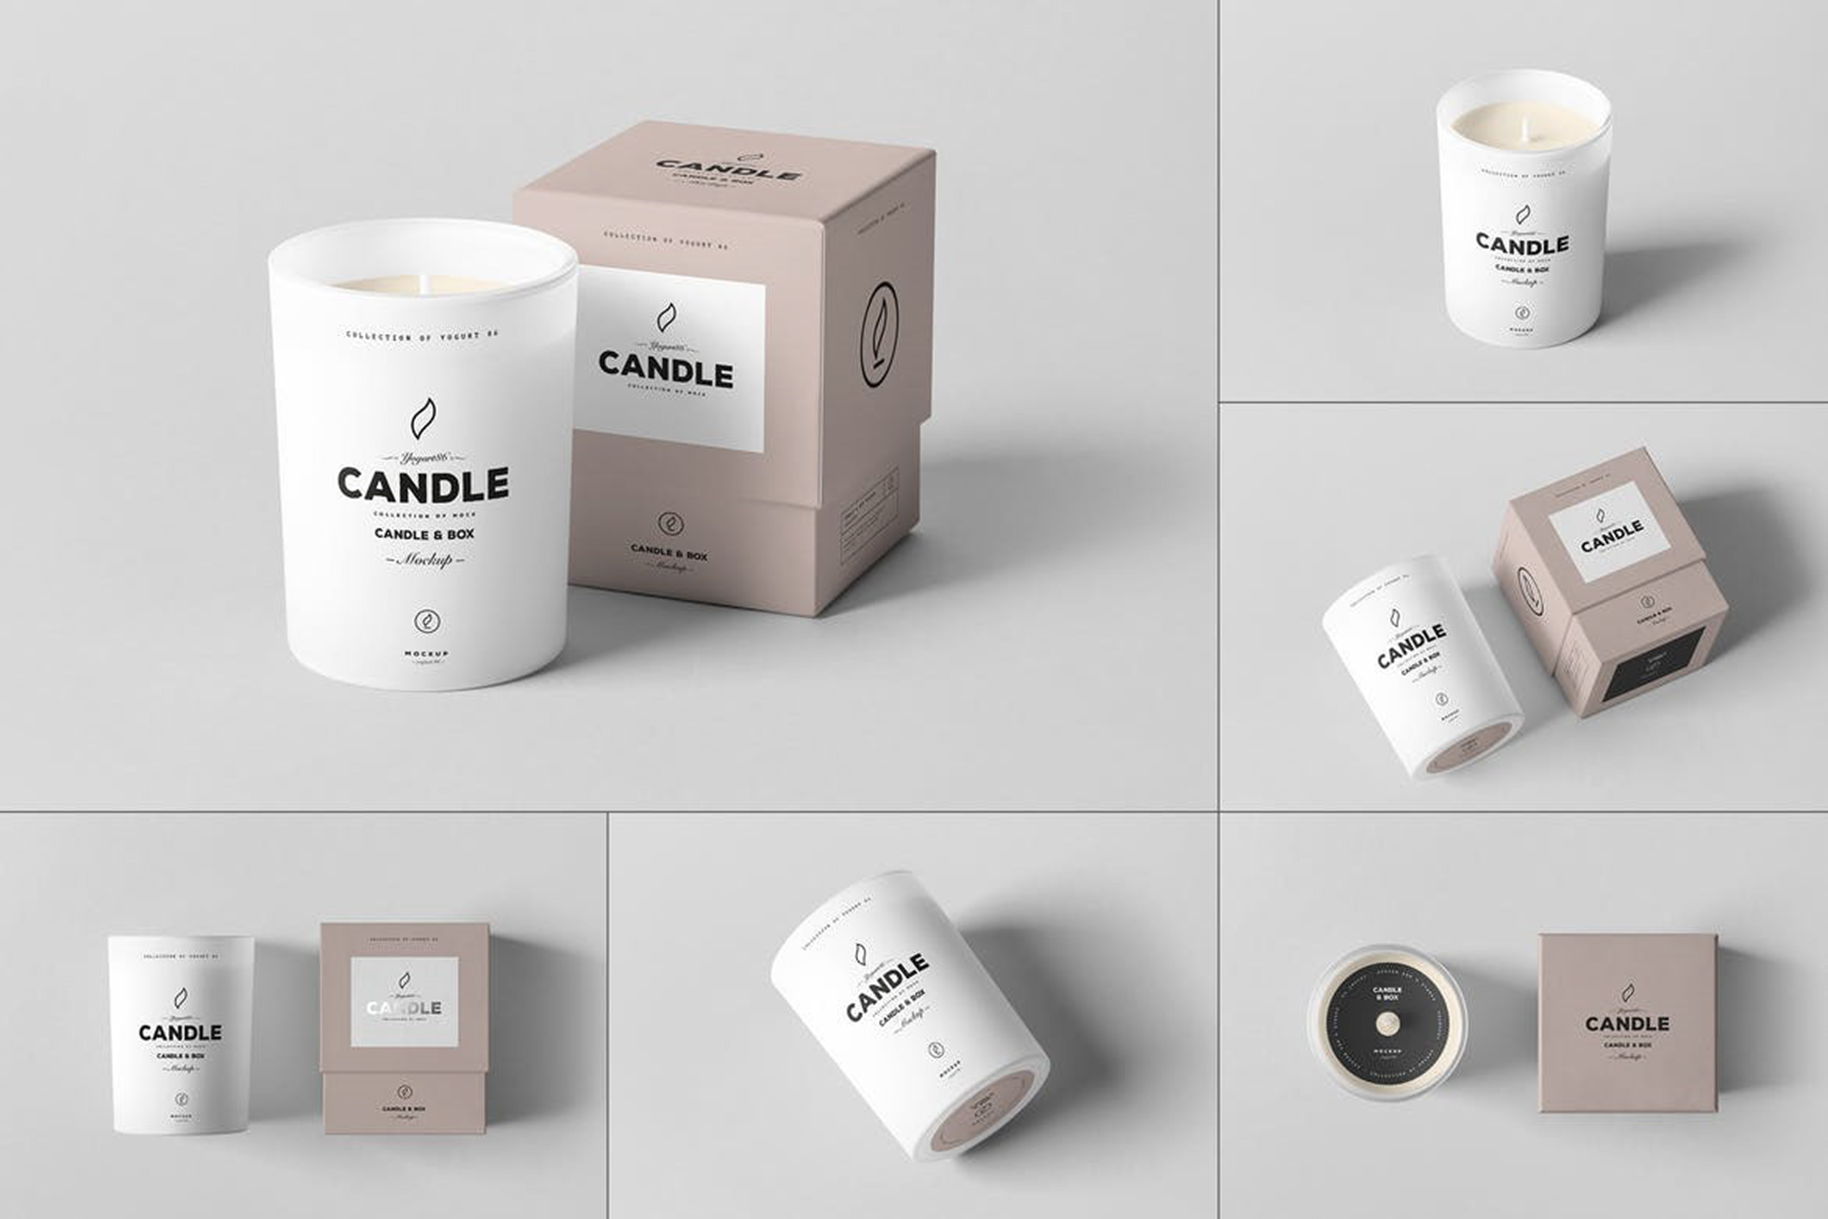 What Makes Candle Boxes Be Effective In Boosting Brands And Products